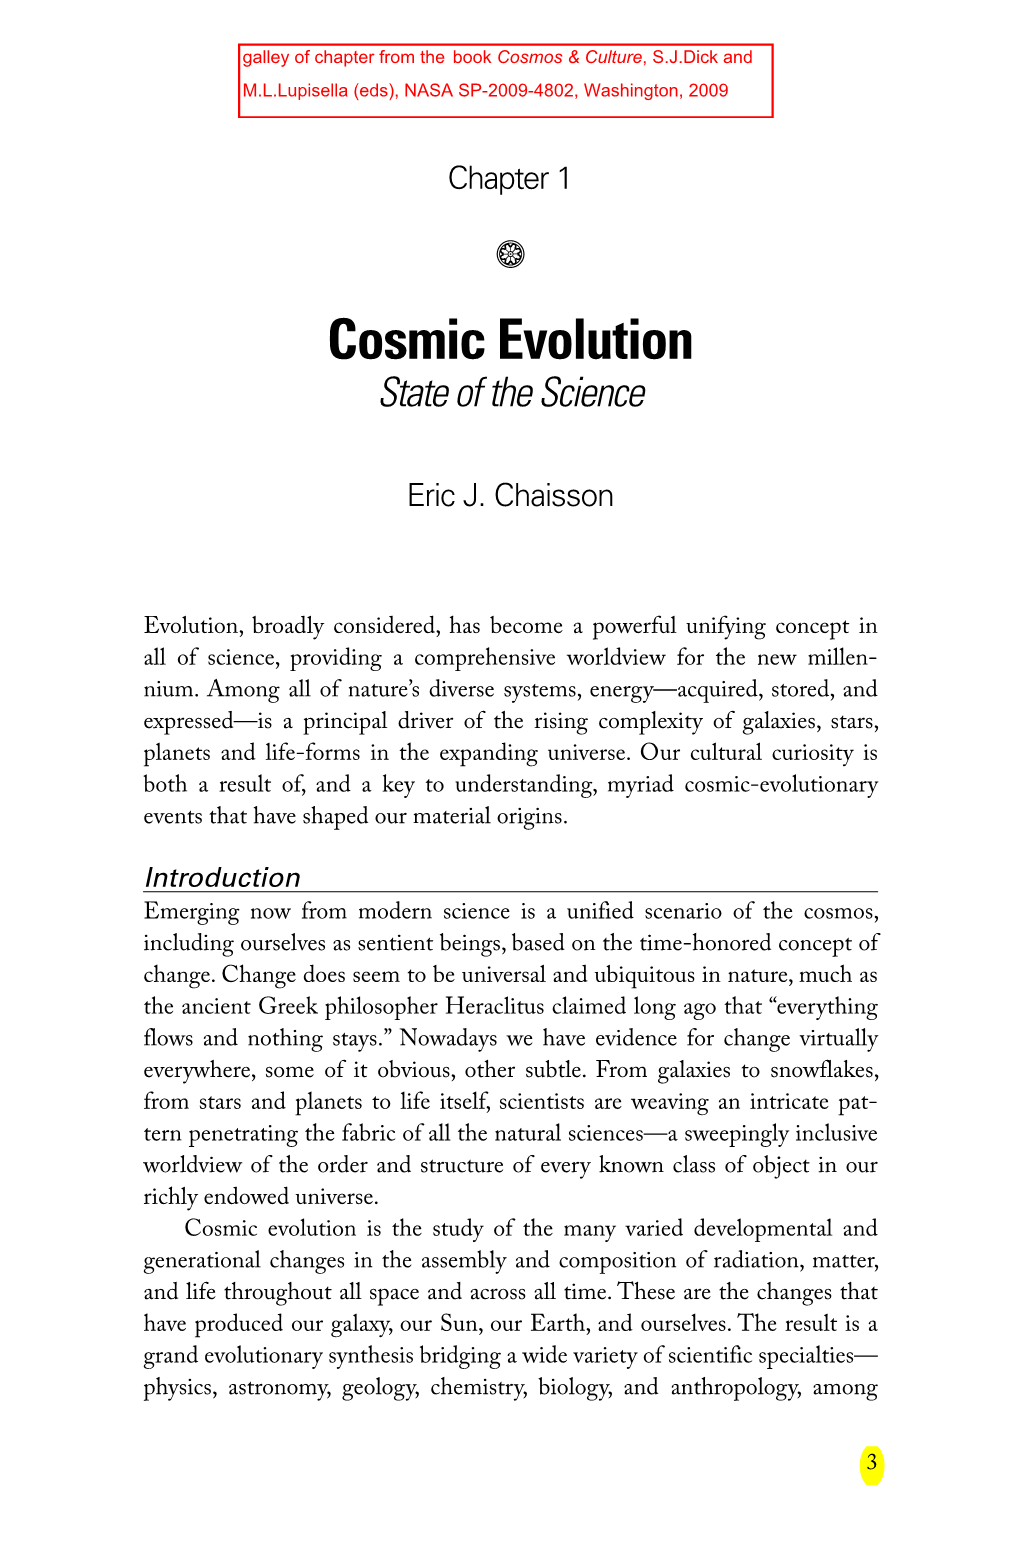 Cosmic Evolution State of the Science